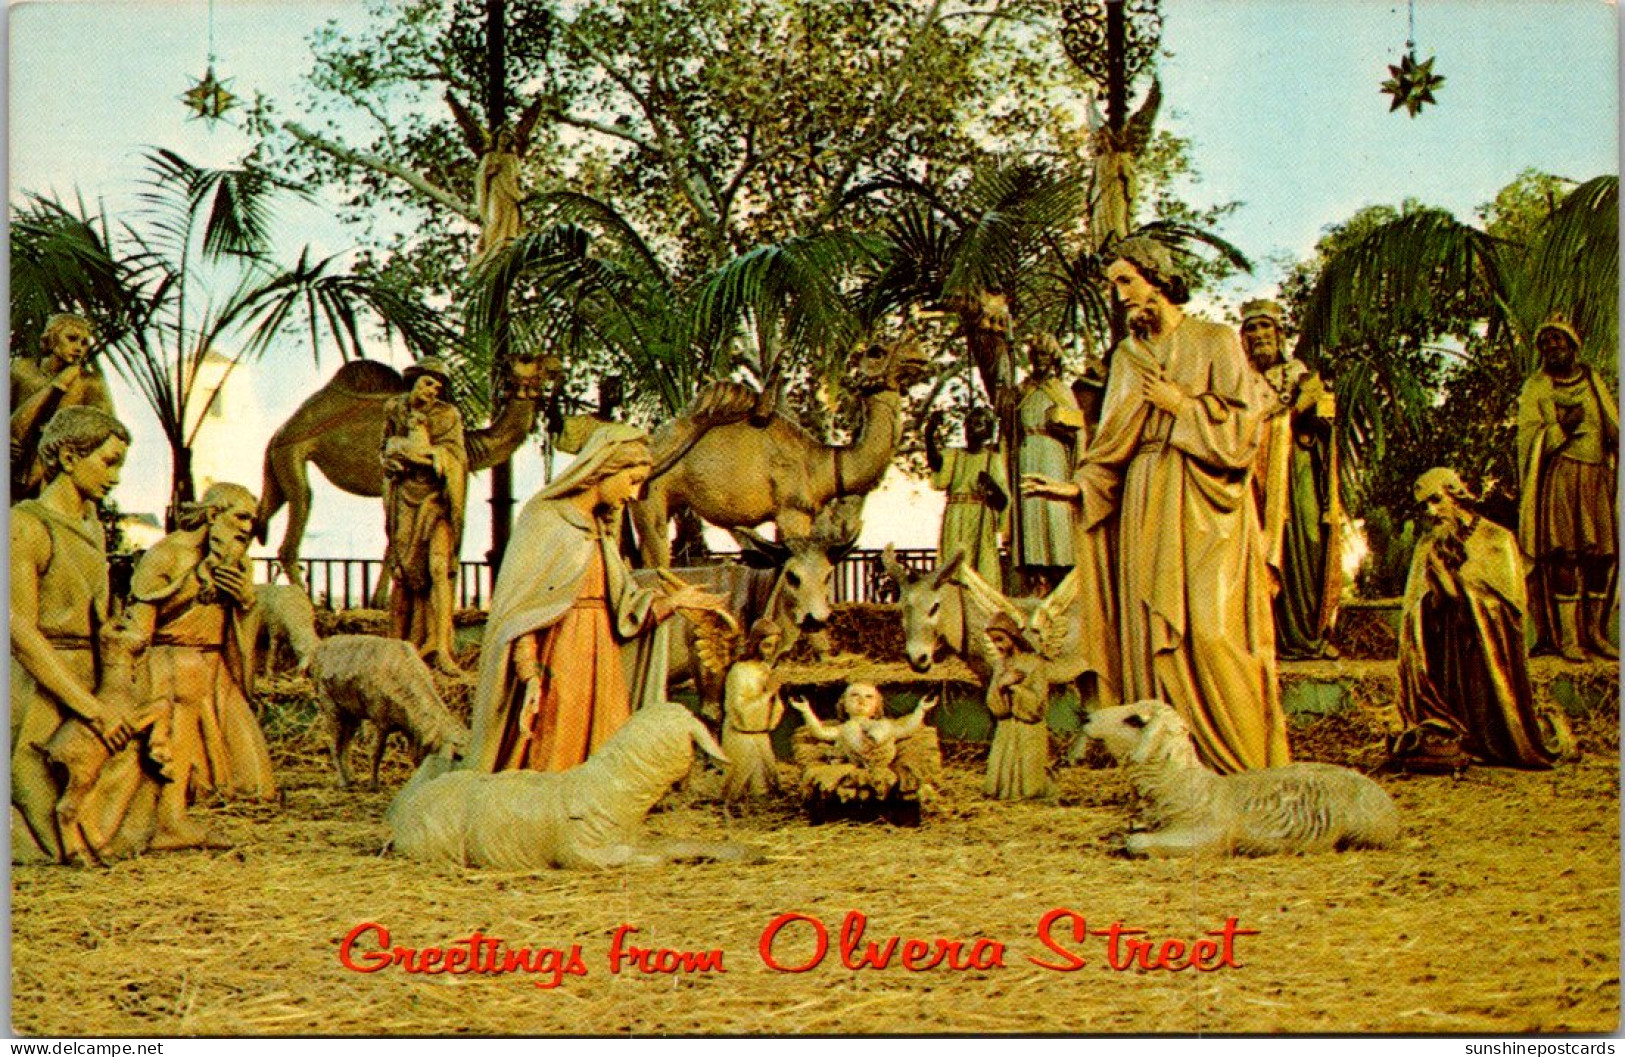 California Los Angeles Greetings From Olvera Street Hand Carved Figures Depicting Birth Of Christ - Los Angeles